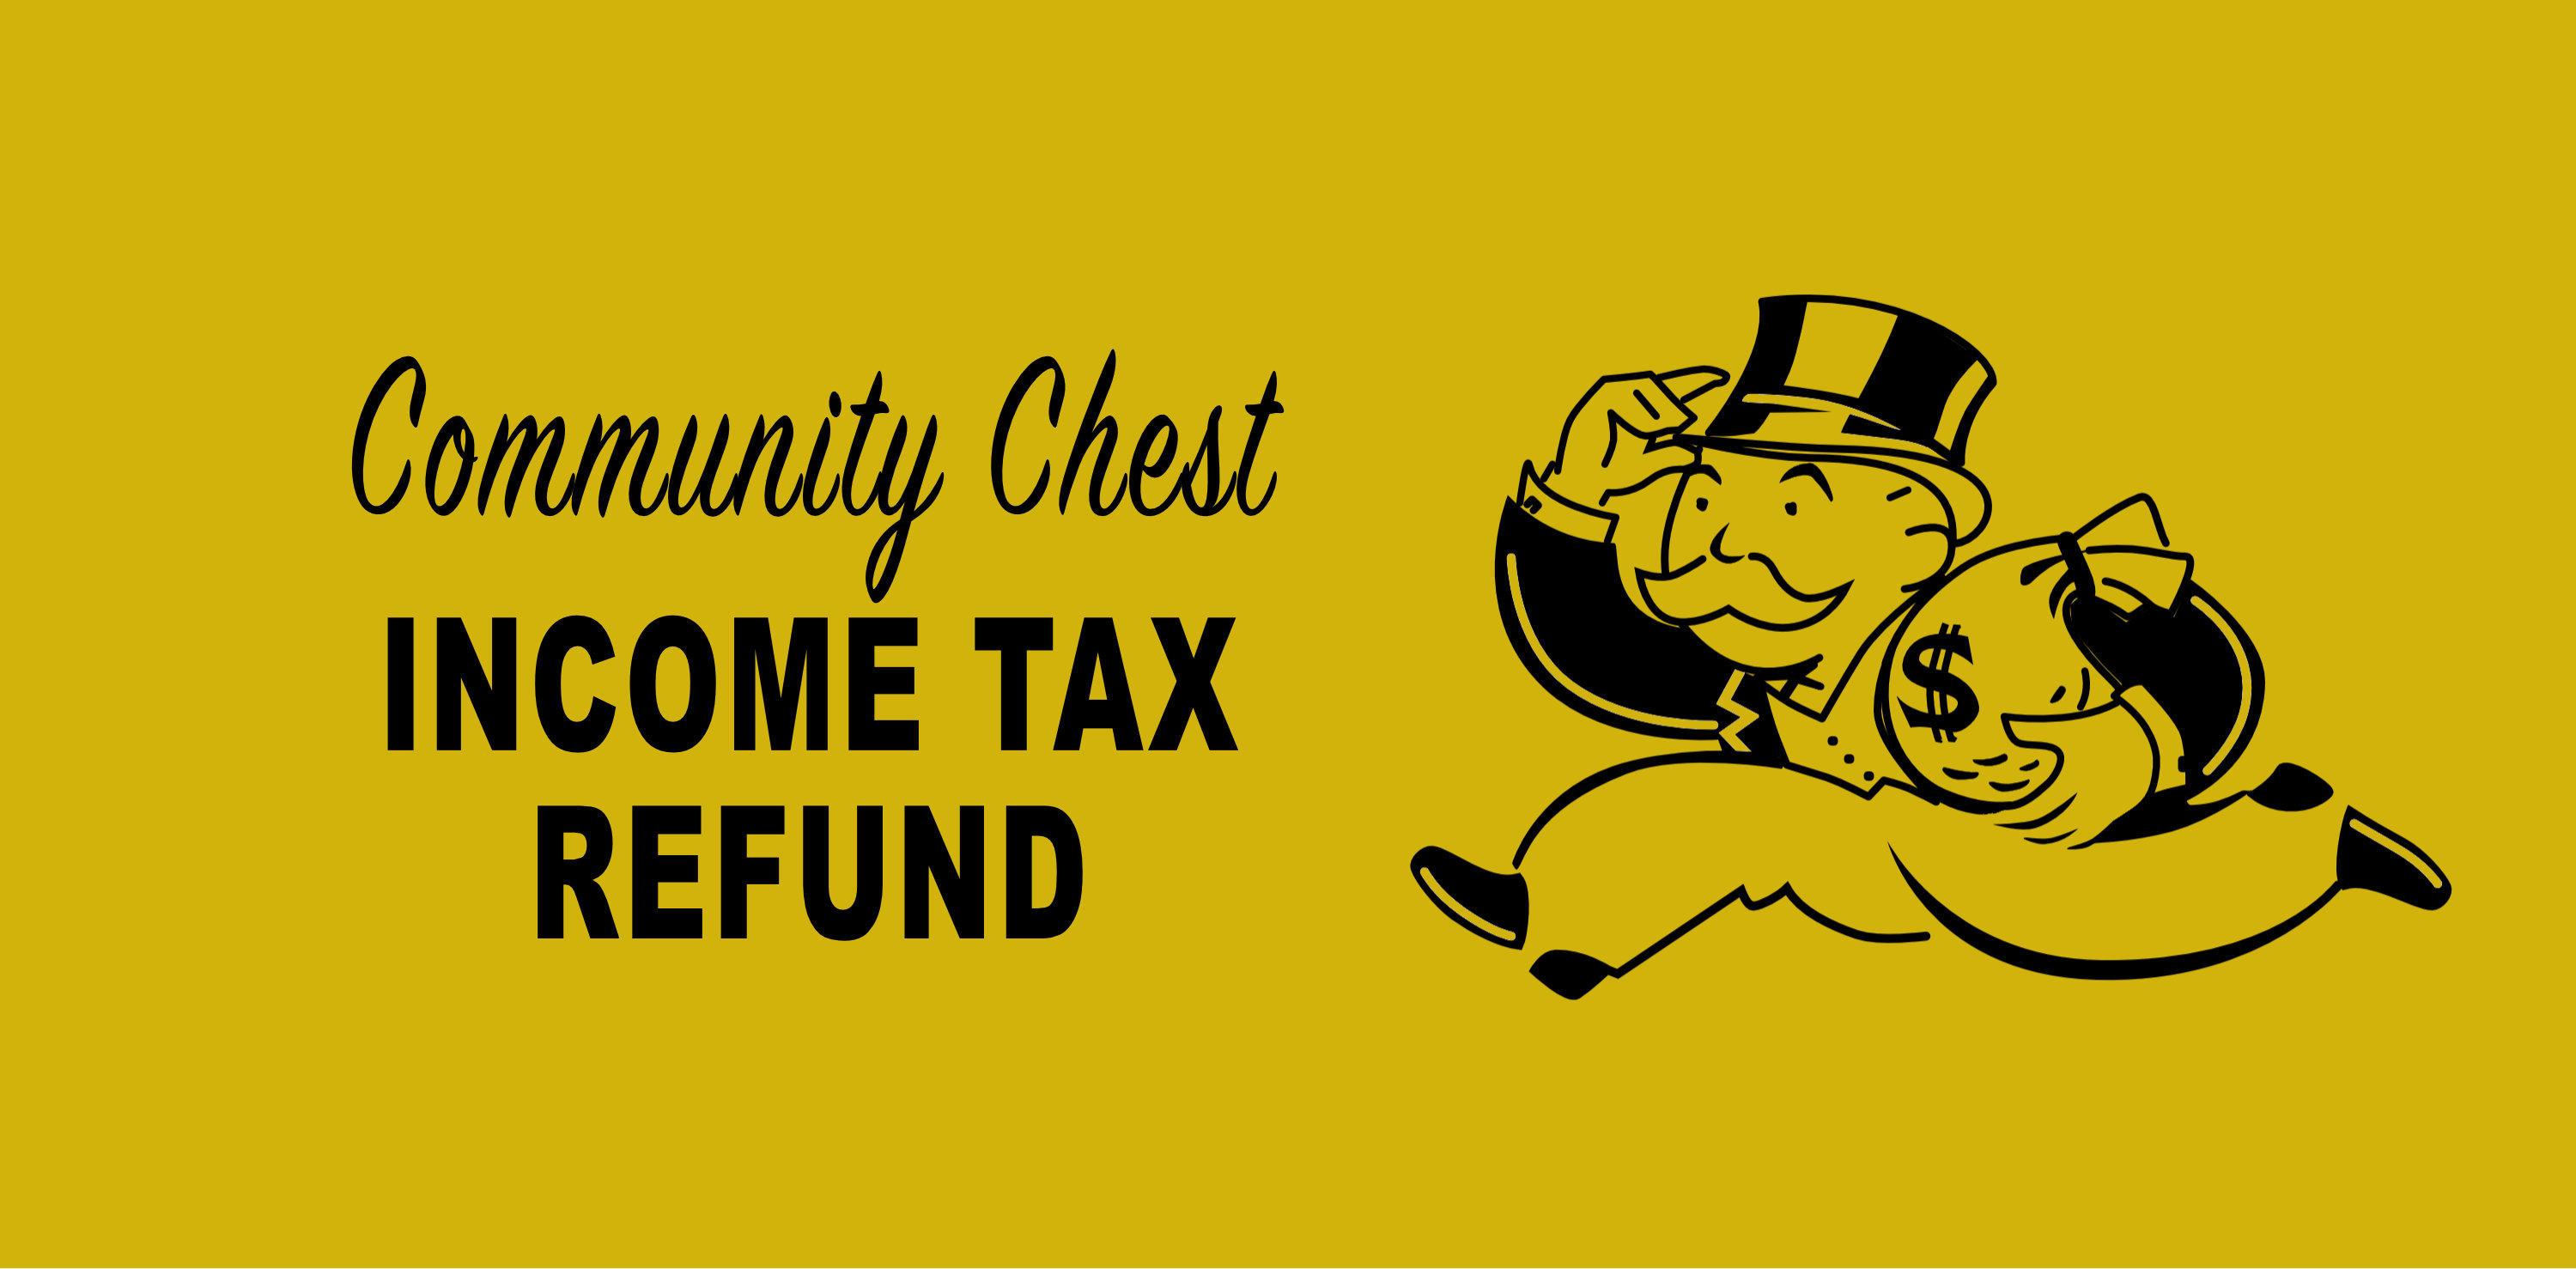 How to use your tax refund wisely